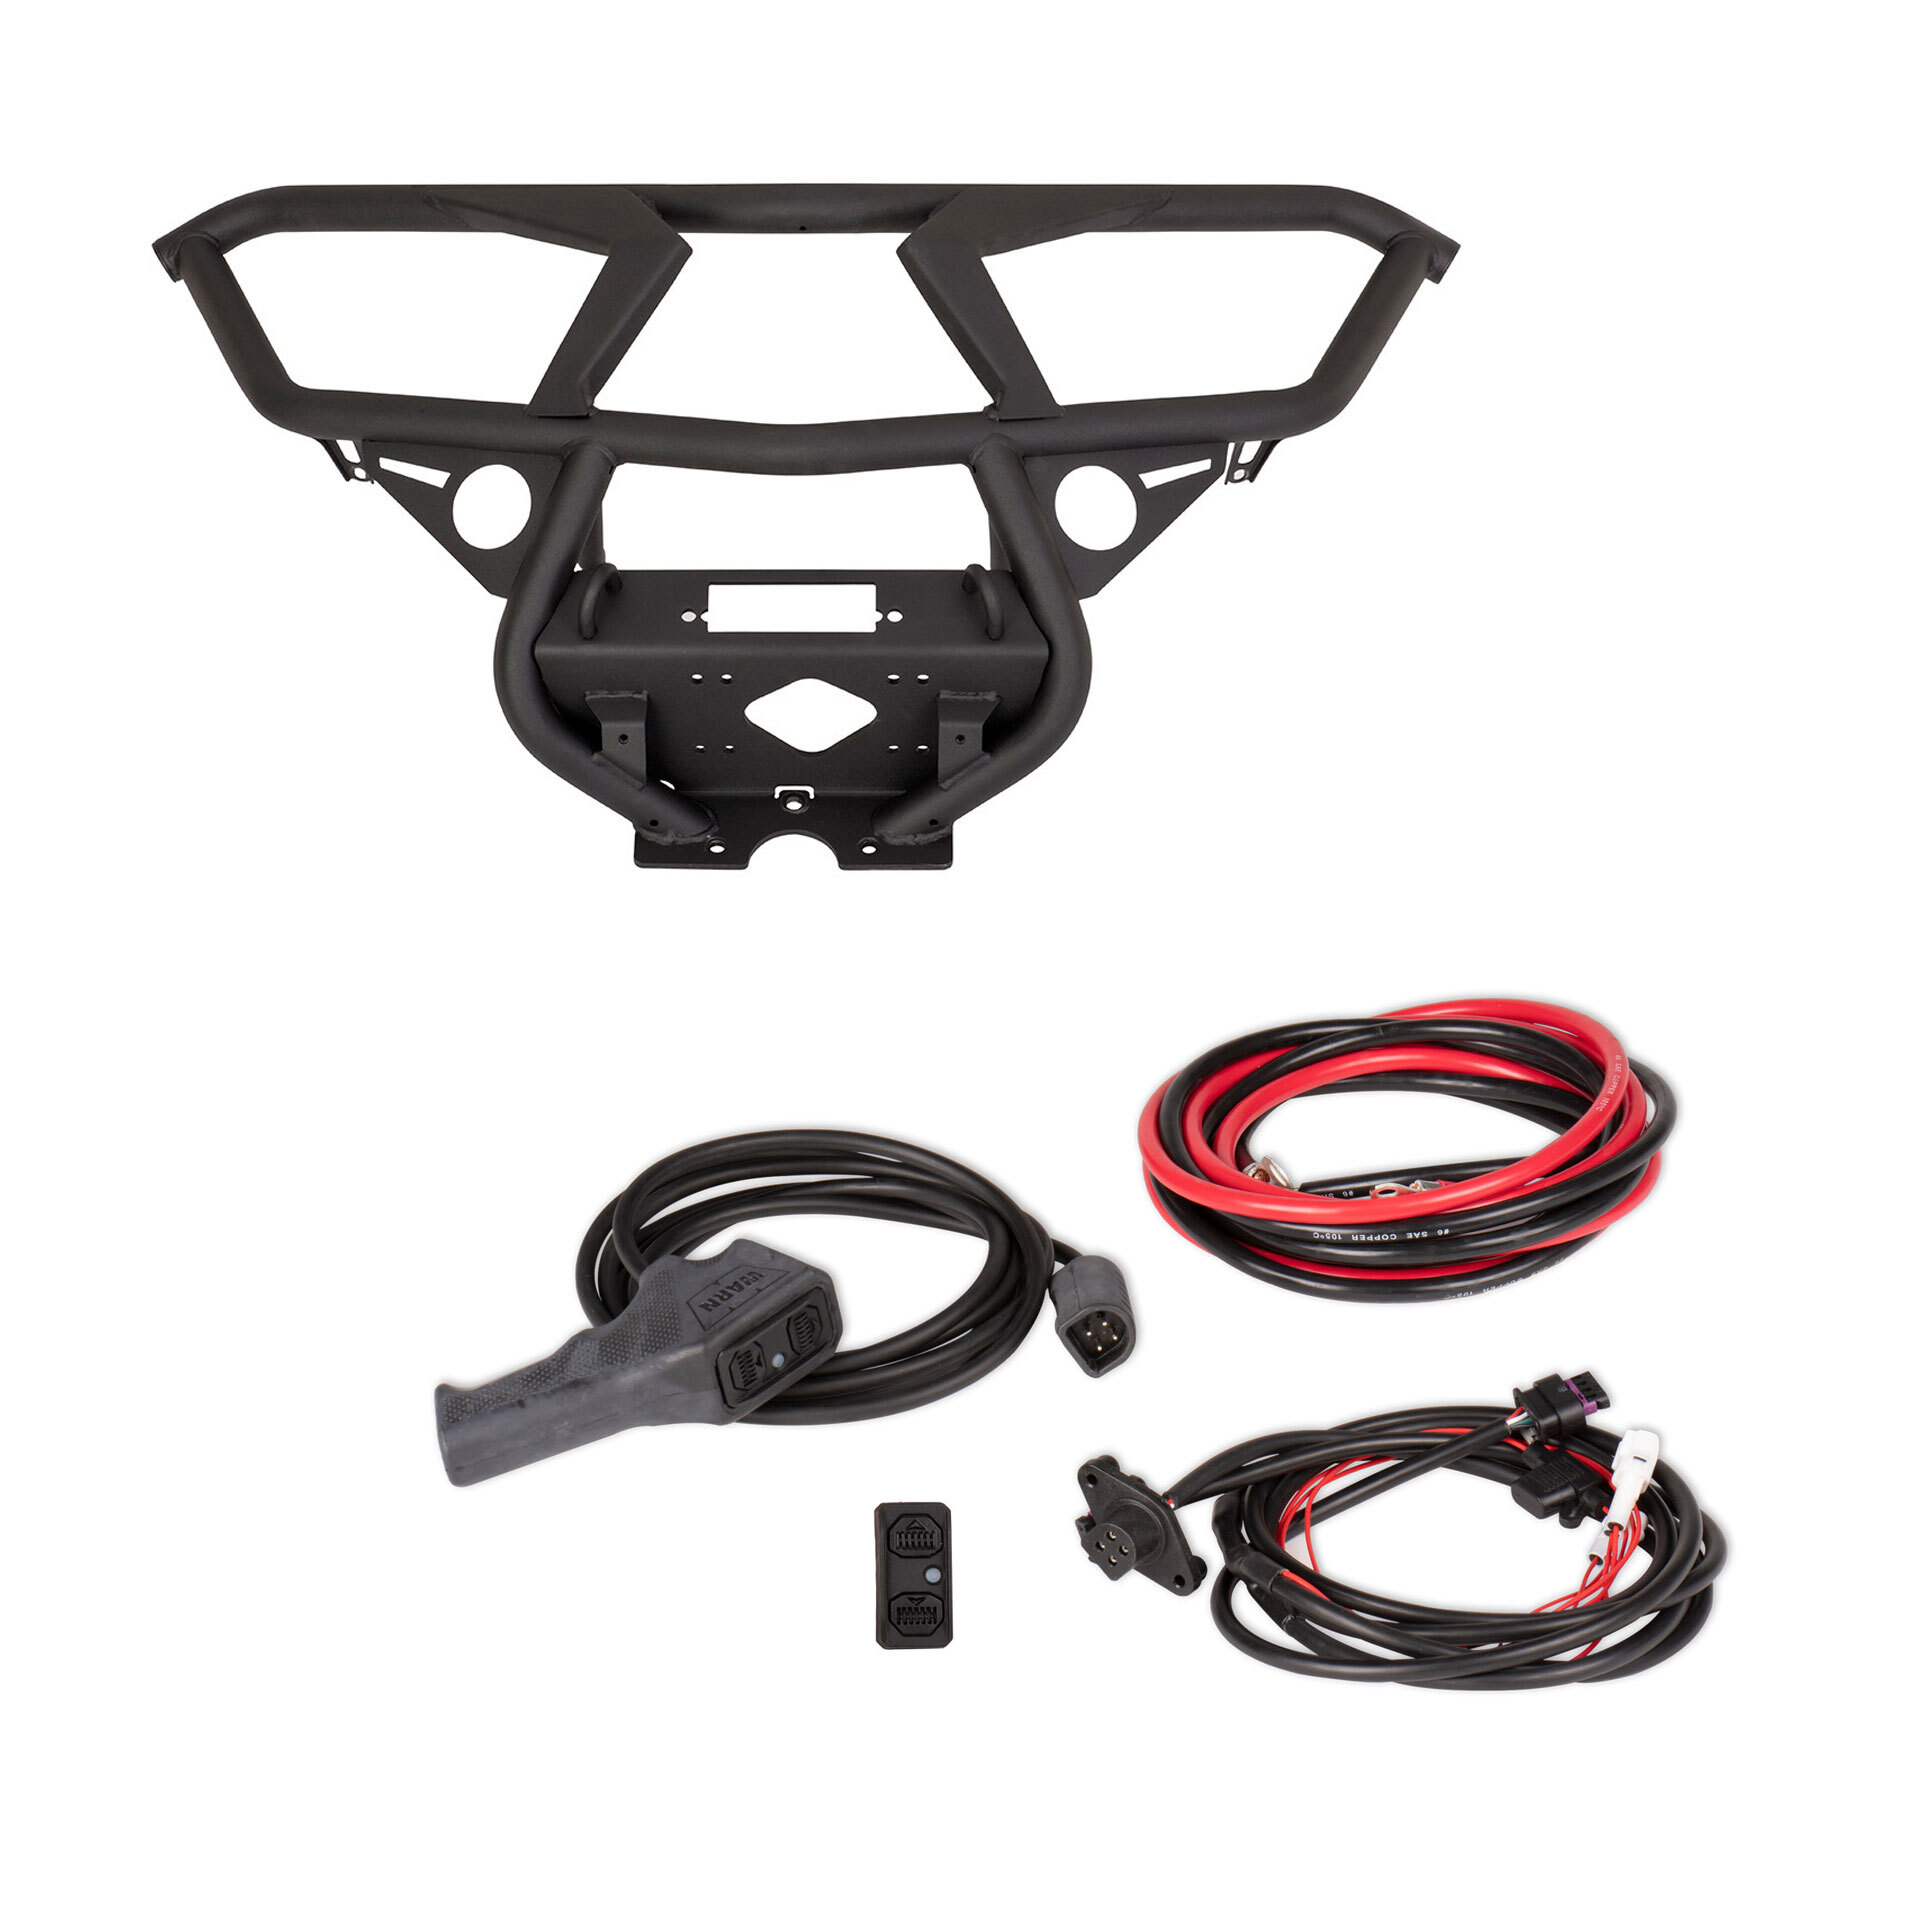 WARN® AXON Front Brush Guard with Winch Mount Kit